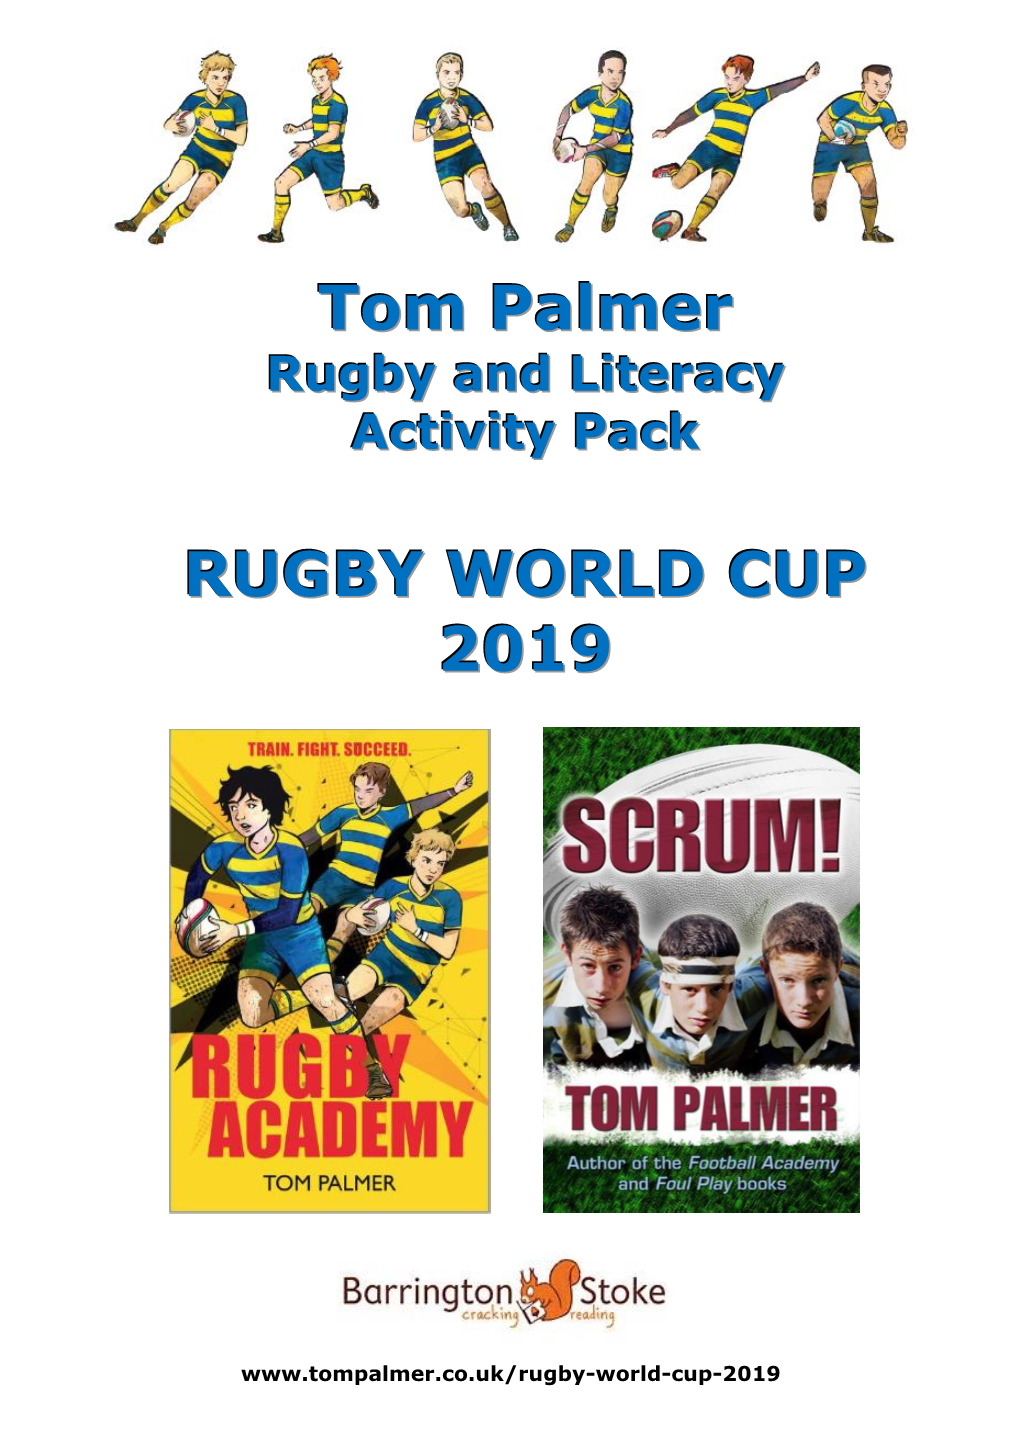 Tom Palmer RUGBY WORLD CUP 2019